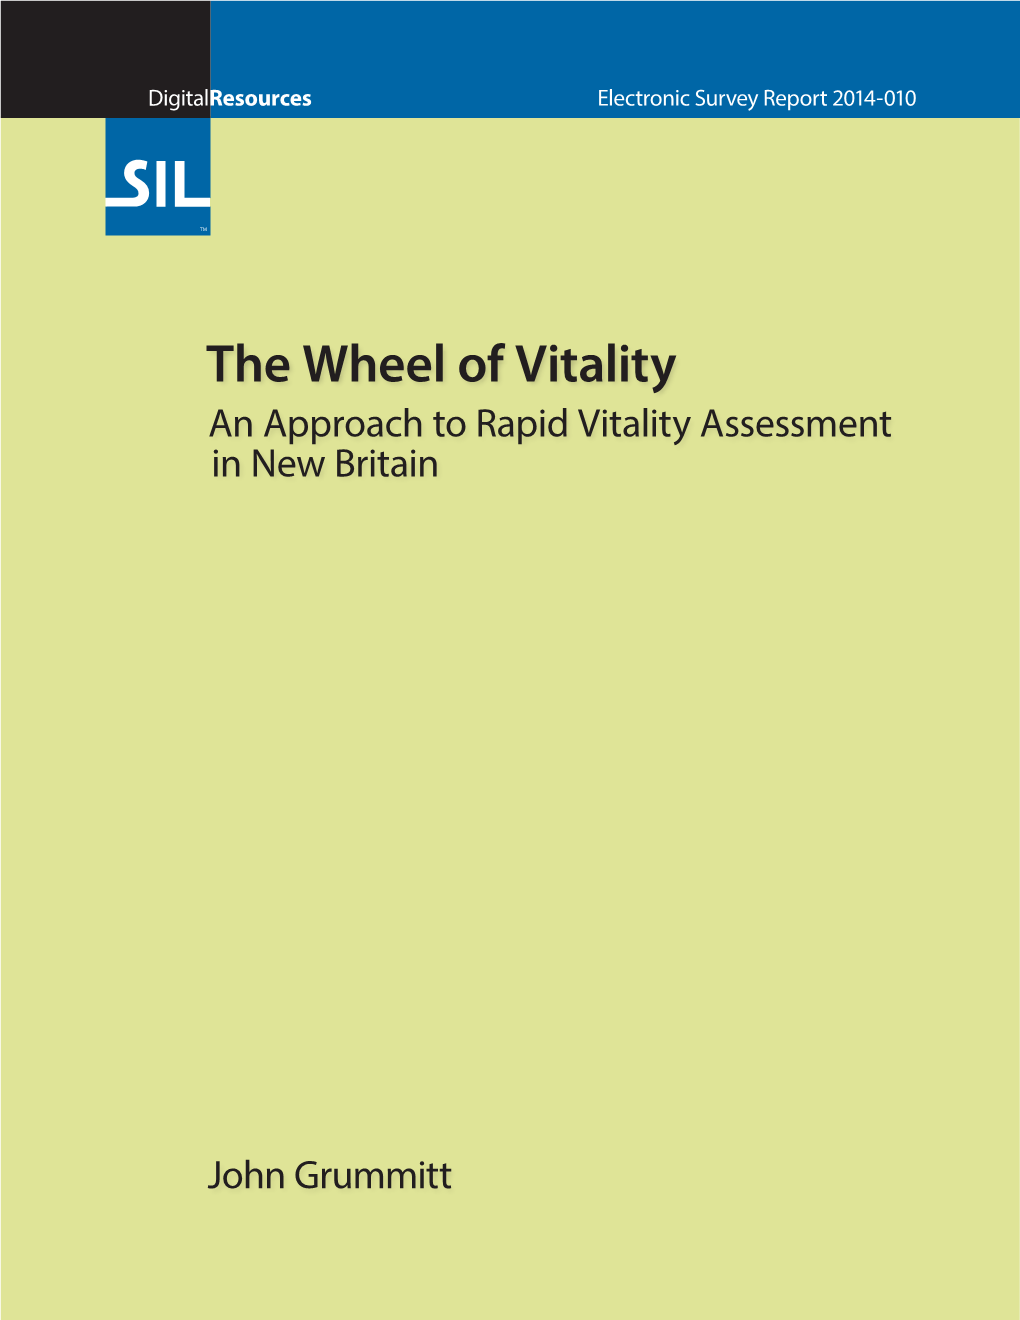 The Wheel of Vitality: an Approach to Rapid Vitality Assessment in New Britain